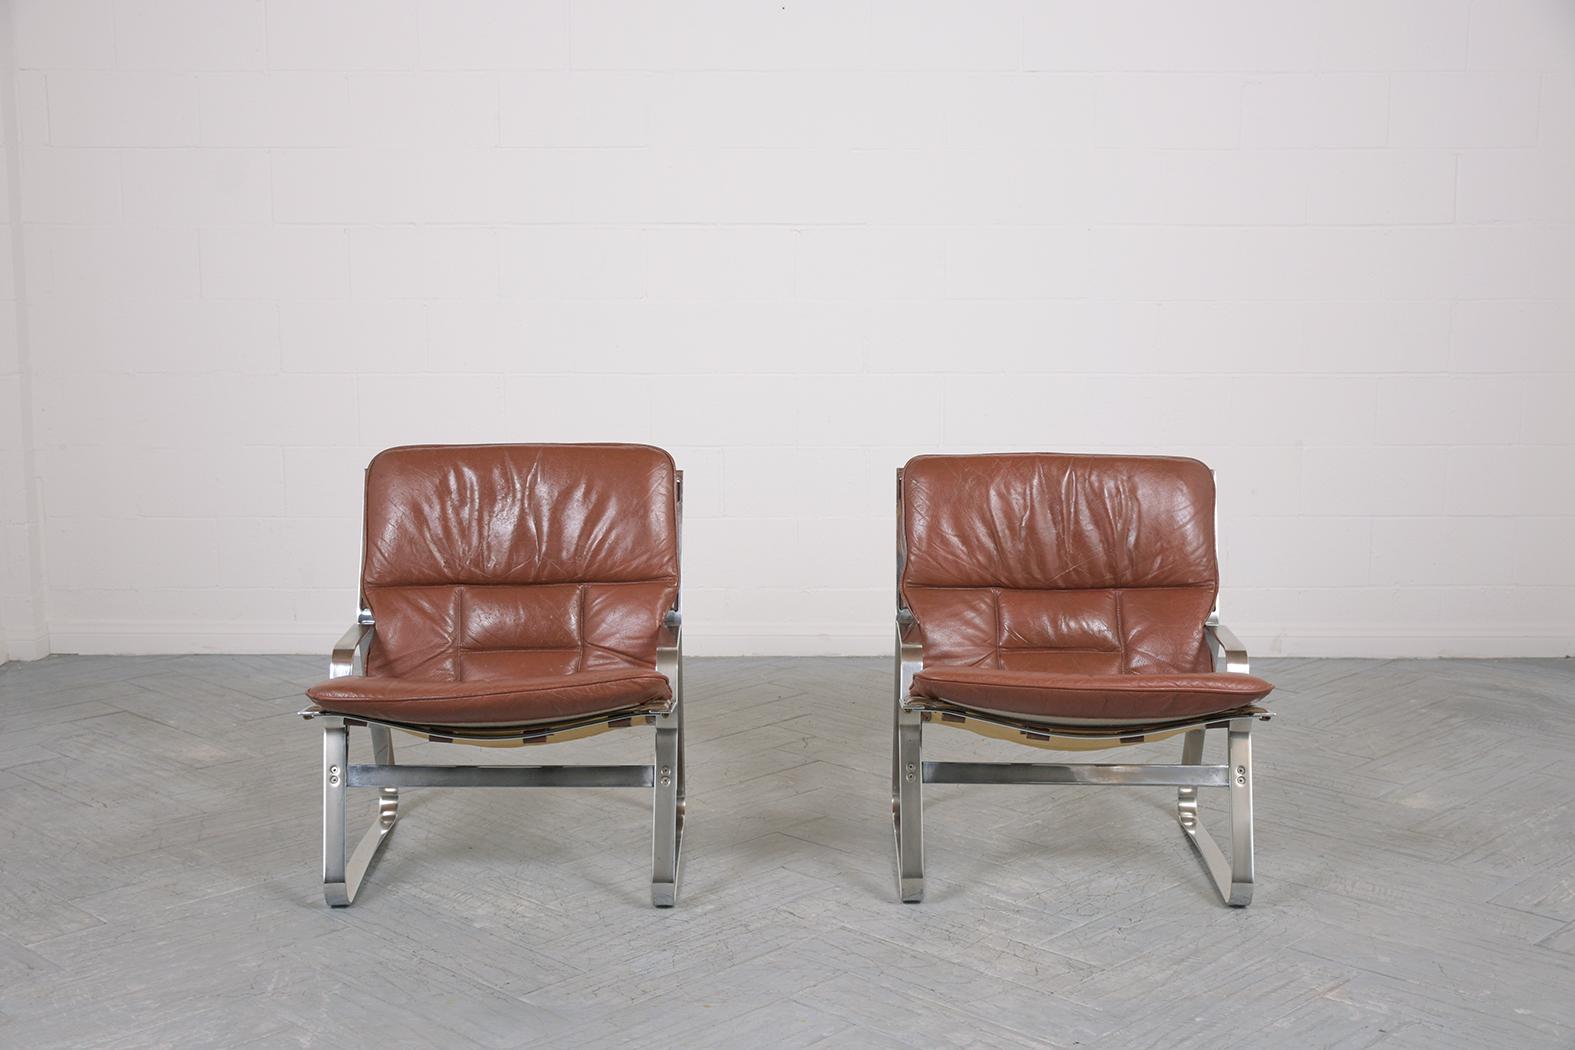 Indulge in the luxury of Norwegian design with our exquisite pair of mid-century modern lounge chairs, a creation of the iconic designers Elsa & Nordahl Solheim and masterfully manufactured by Rykkin & Co. These chairs are a perfect representation